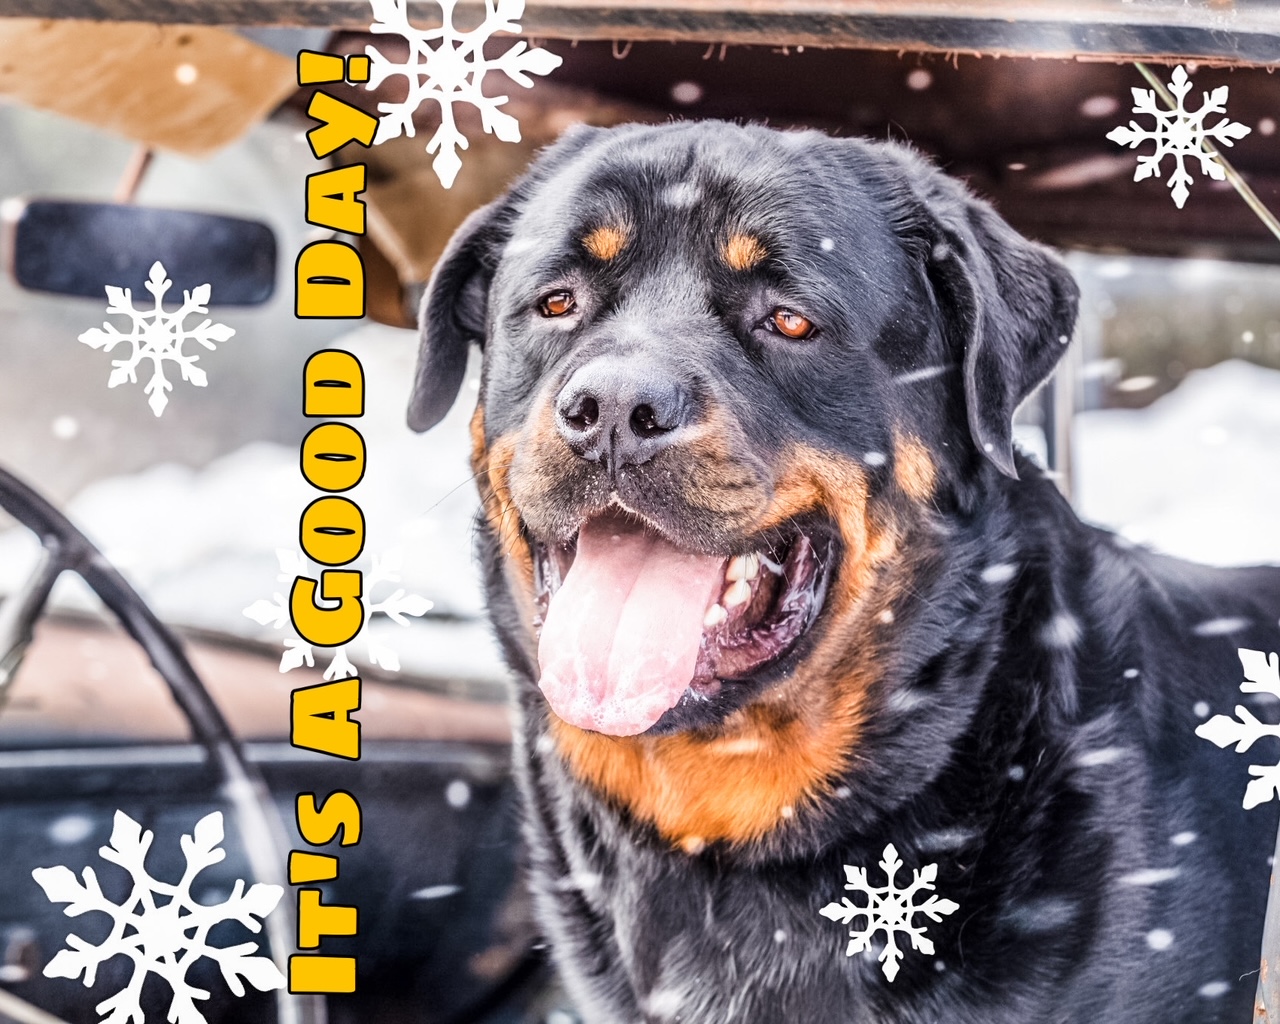 Herc Says: “HAVE A DOG-GONE  Herc Says: “HAVE A DOG-GONE GOOD DAY! Hercules the junkyard dog wants your unwanted vehicles! Call his people at Pegasus Auto Recycling to schedule free local vehicle removal. Cash paid for vehicles running or not. Call Pegasus Auto Recycling at 208-772-3791 and tell them Hercules sent you!